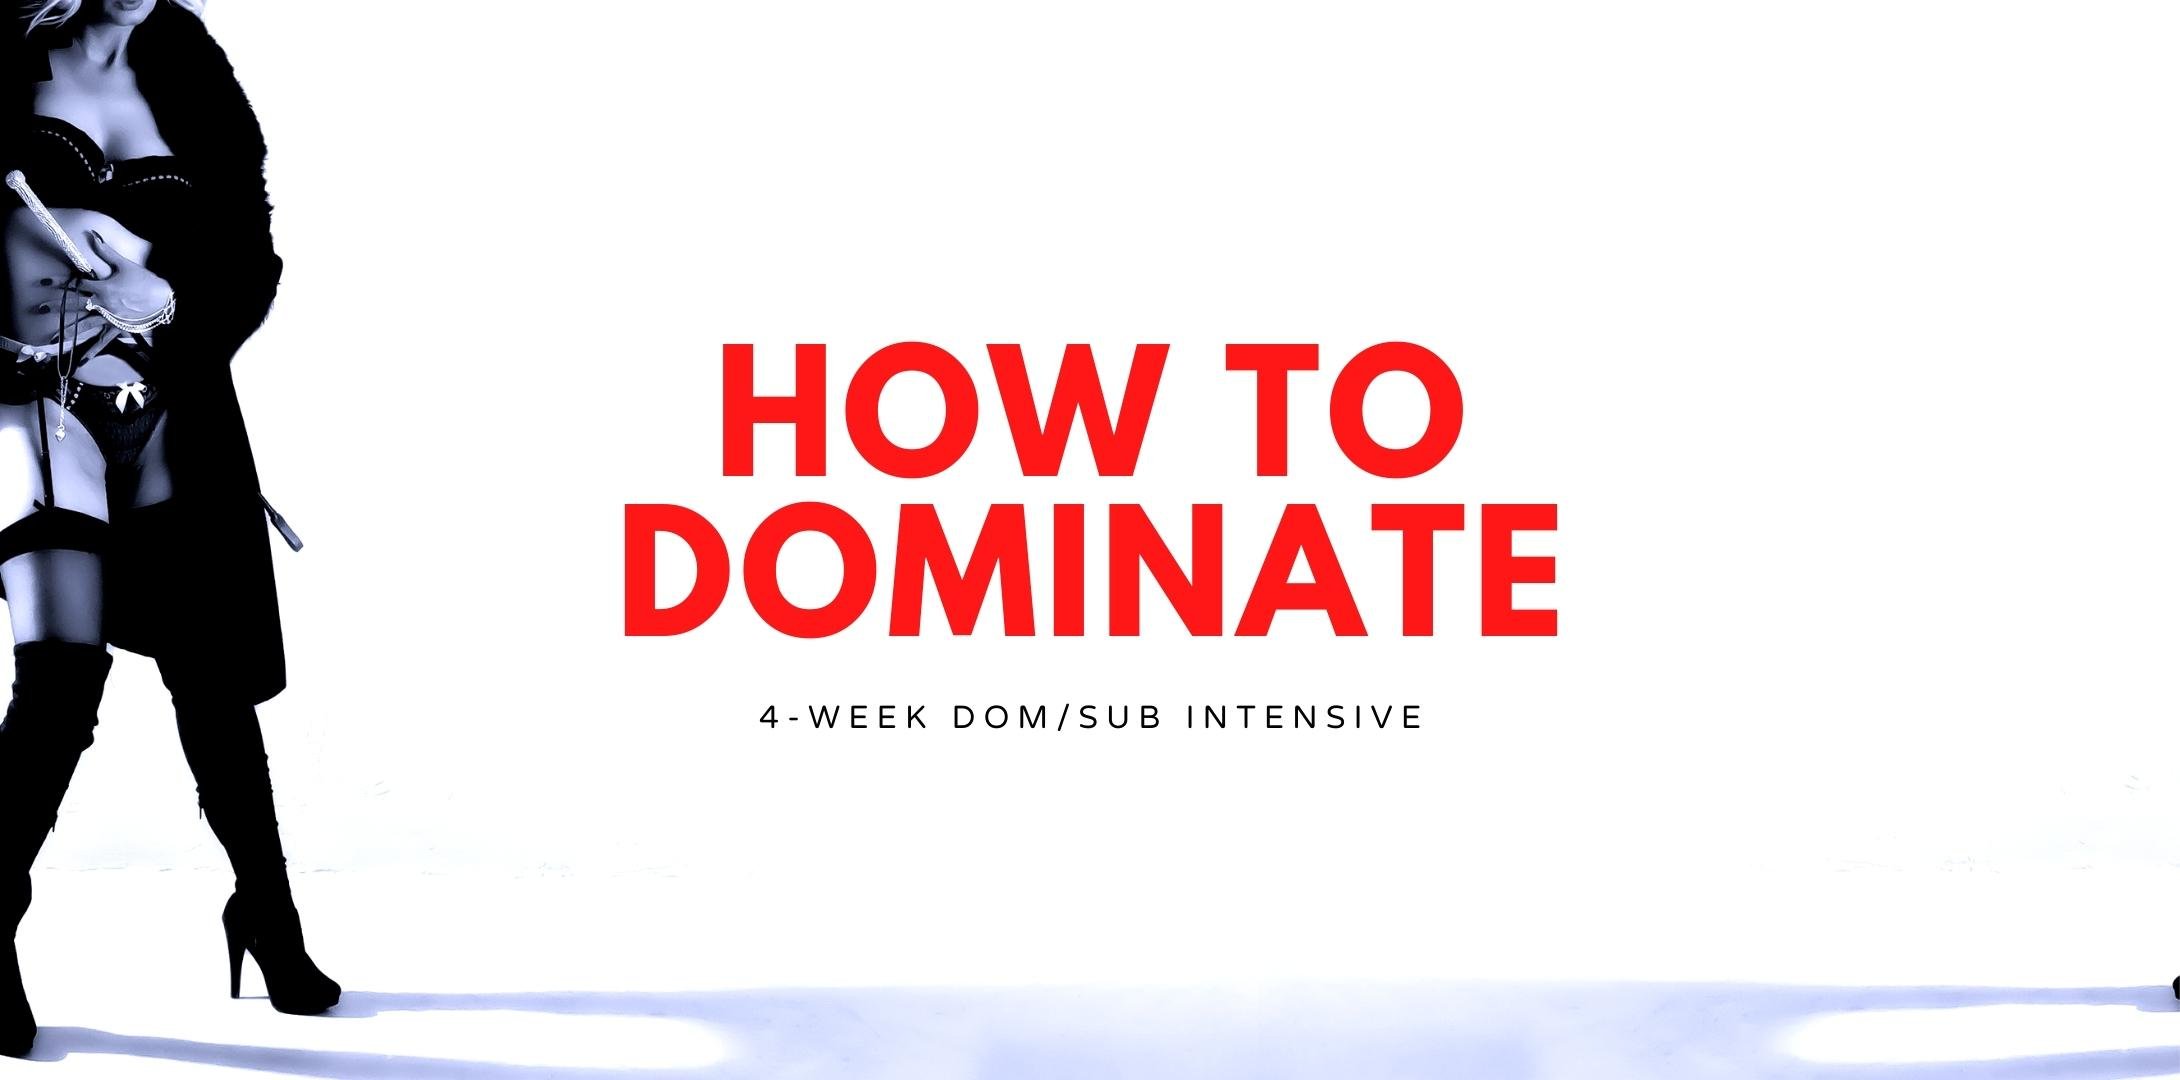 How To Dominate